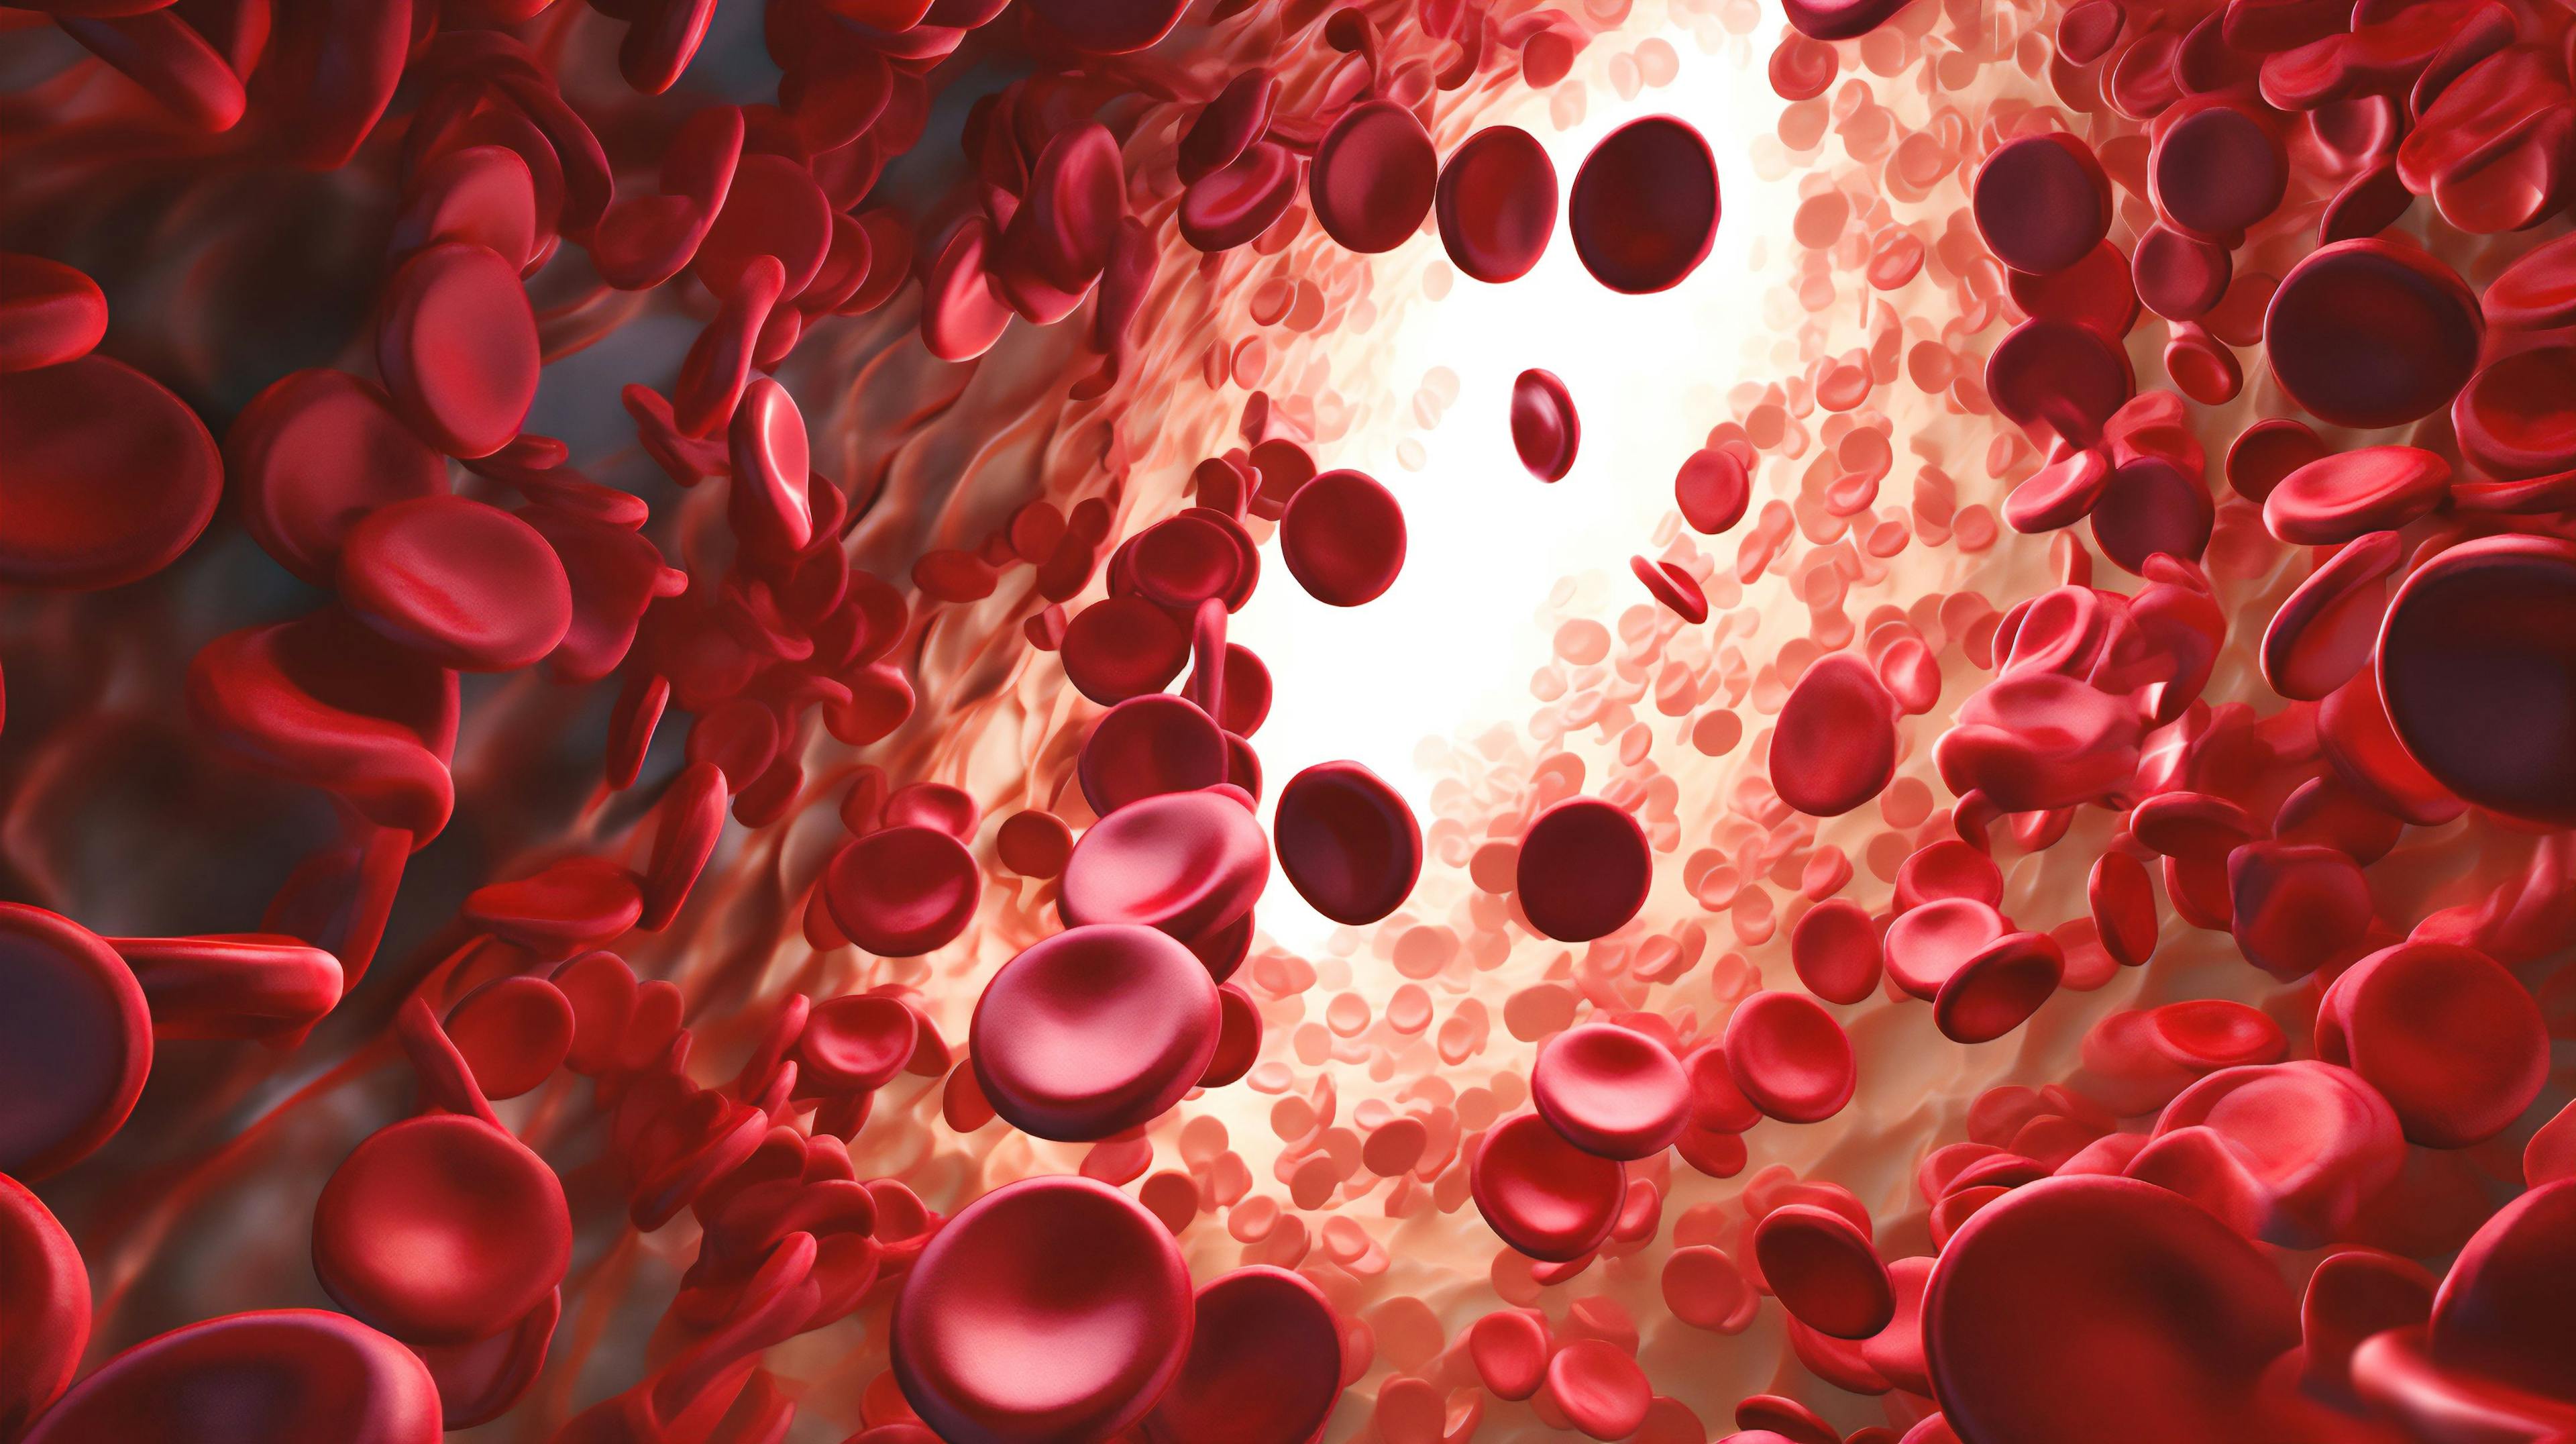 Close-up of red blood cells flowing through a vein: © catalin - stock.adobe.com